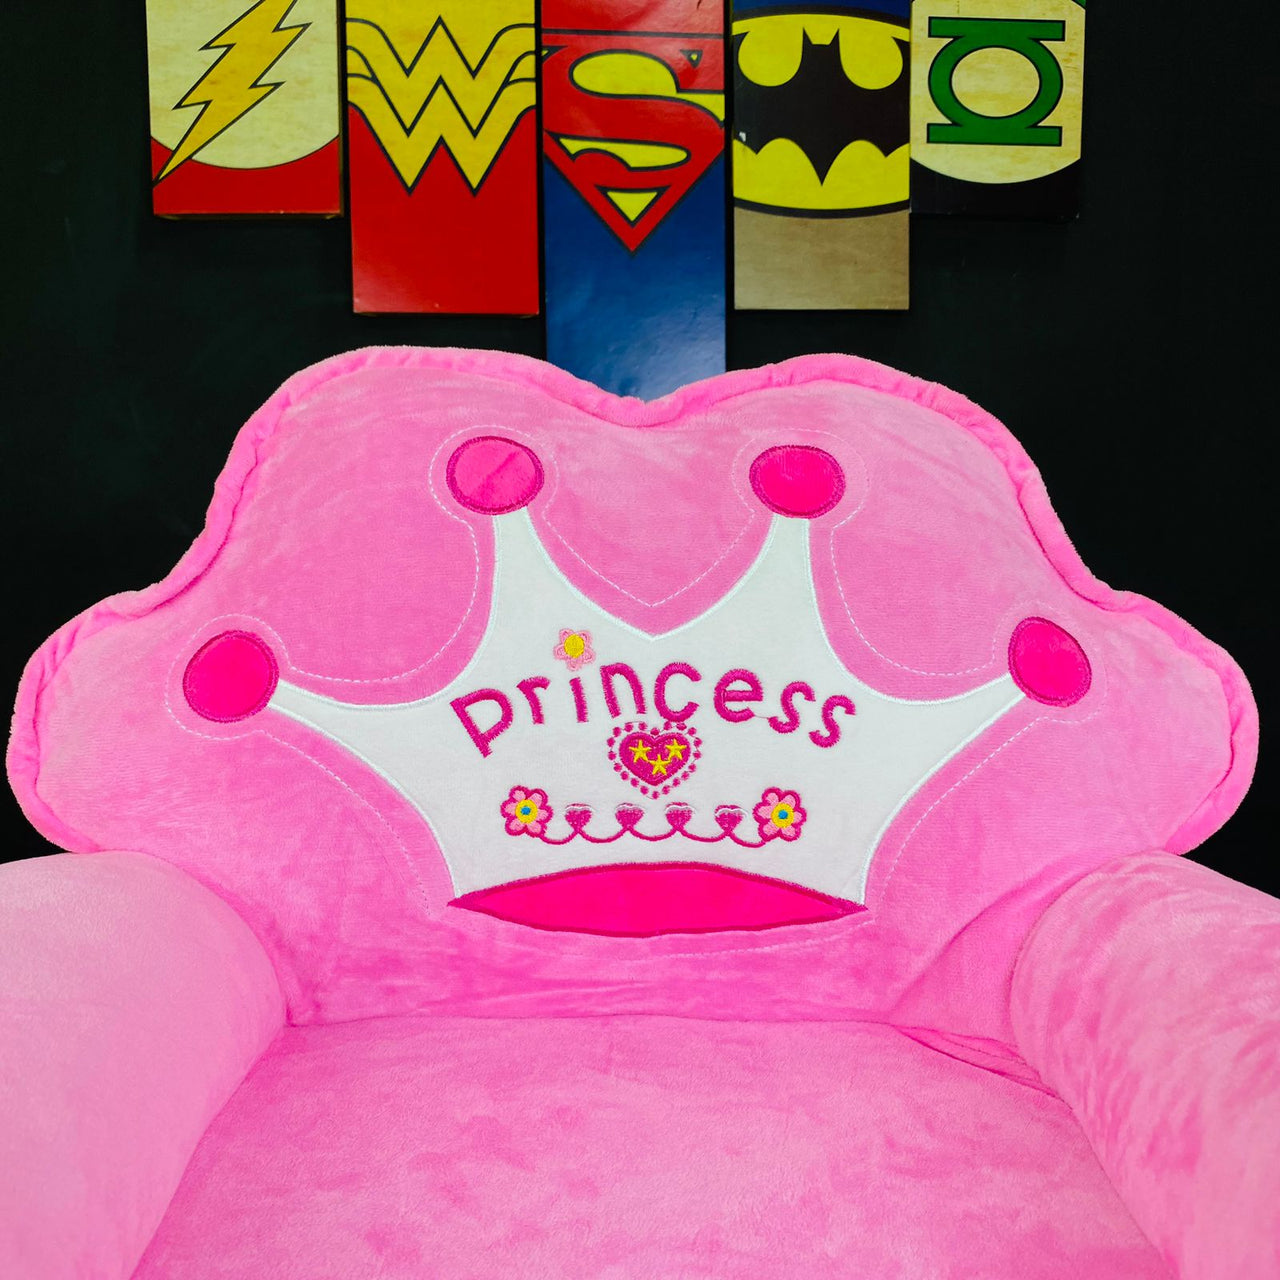 Crown Prince Pink Sofa Seat For Baby